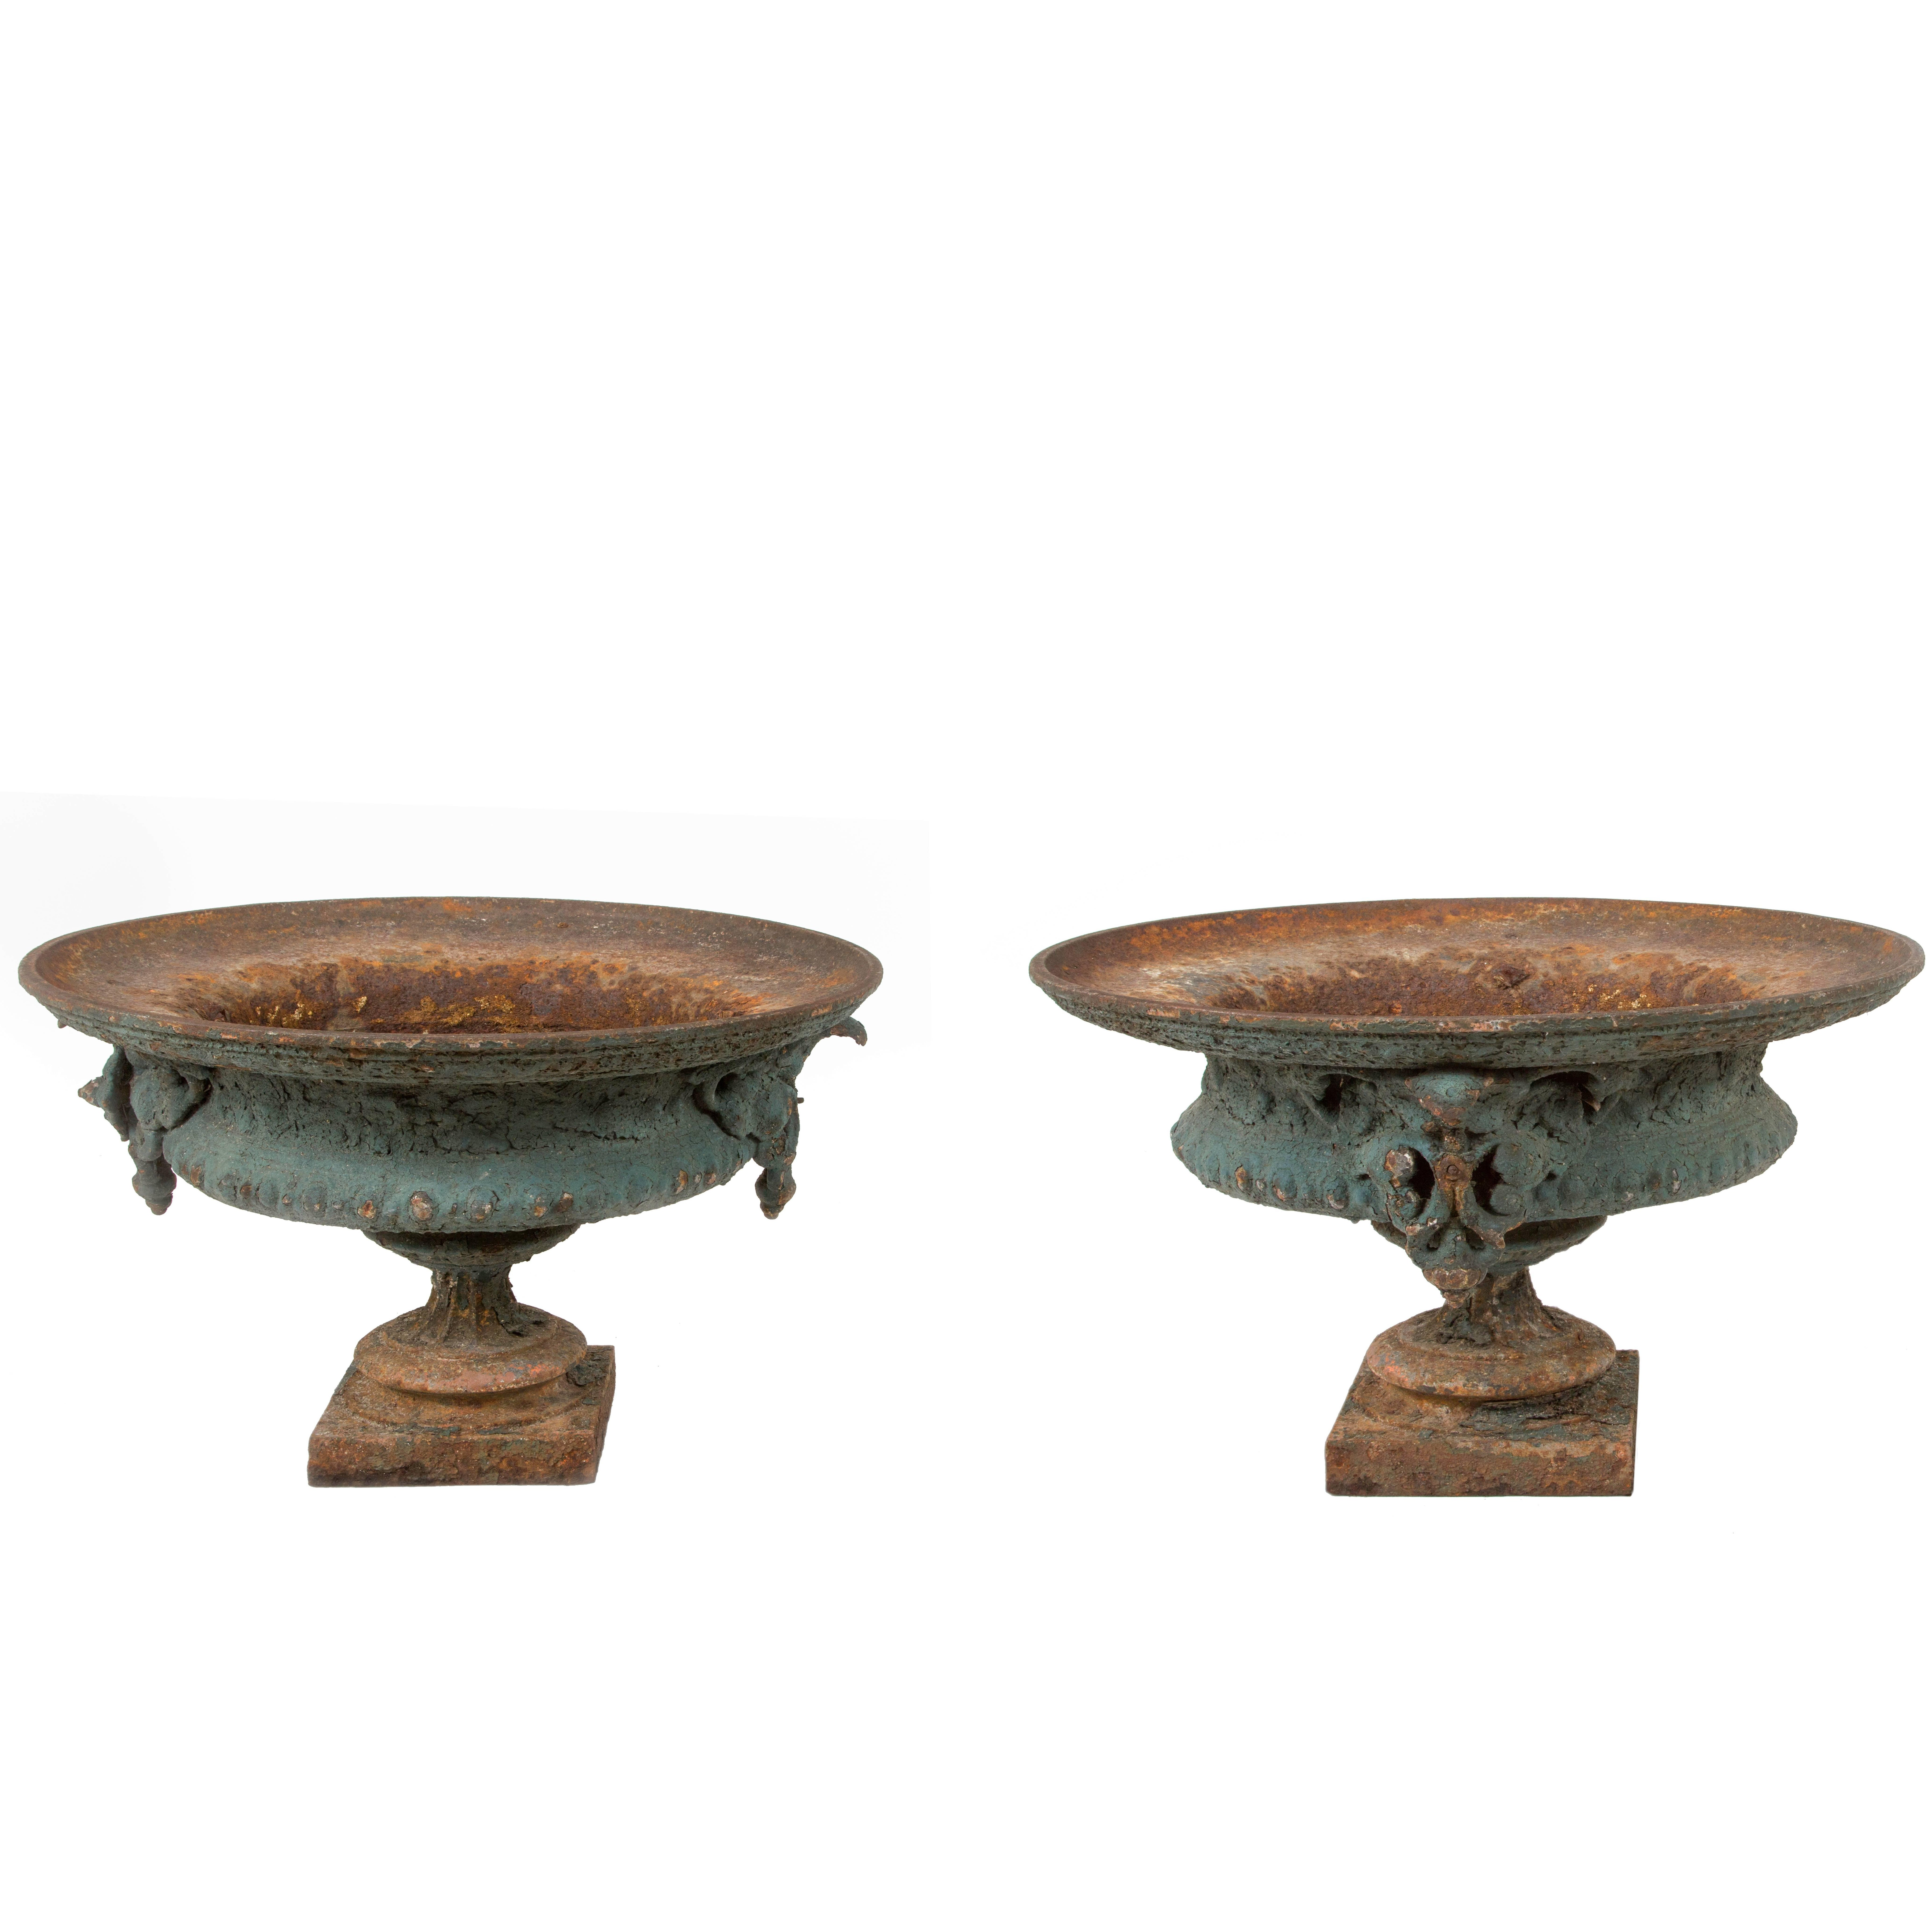 Pair of 19th Century French Iron Urn Planters